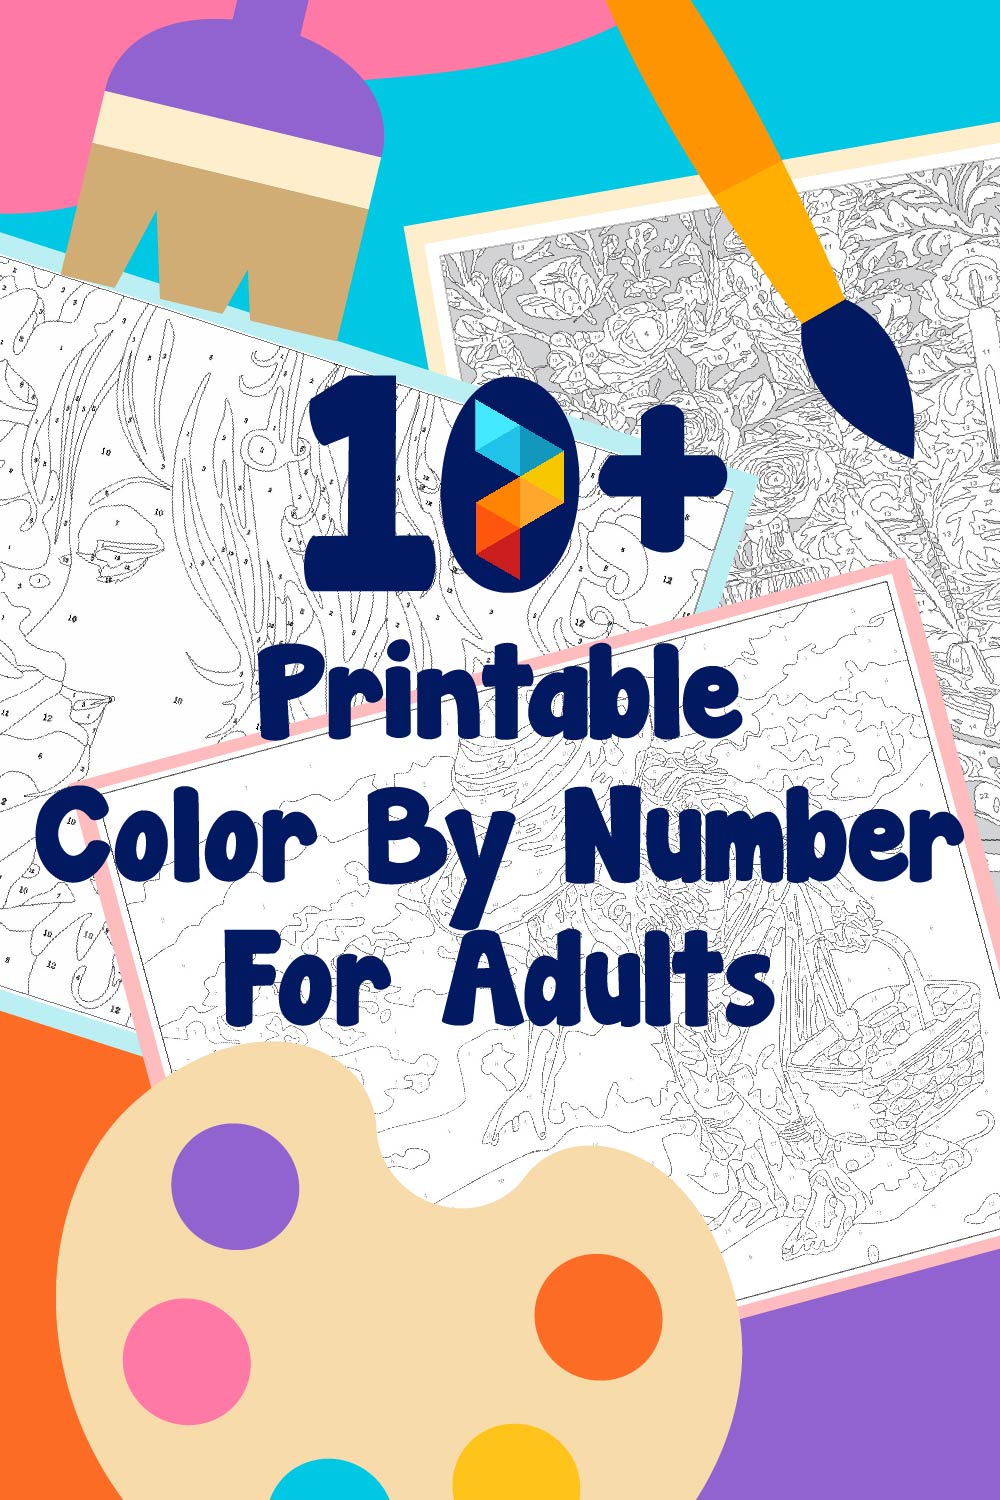 Printable Color By Number For Adults